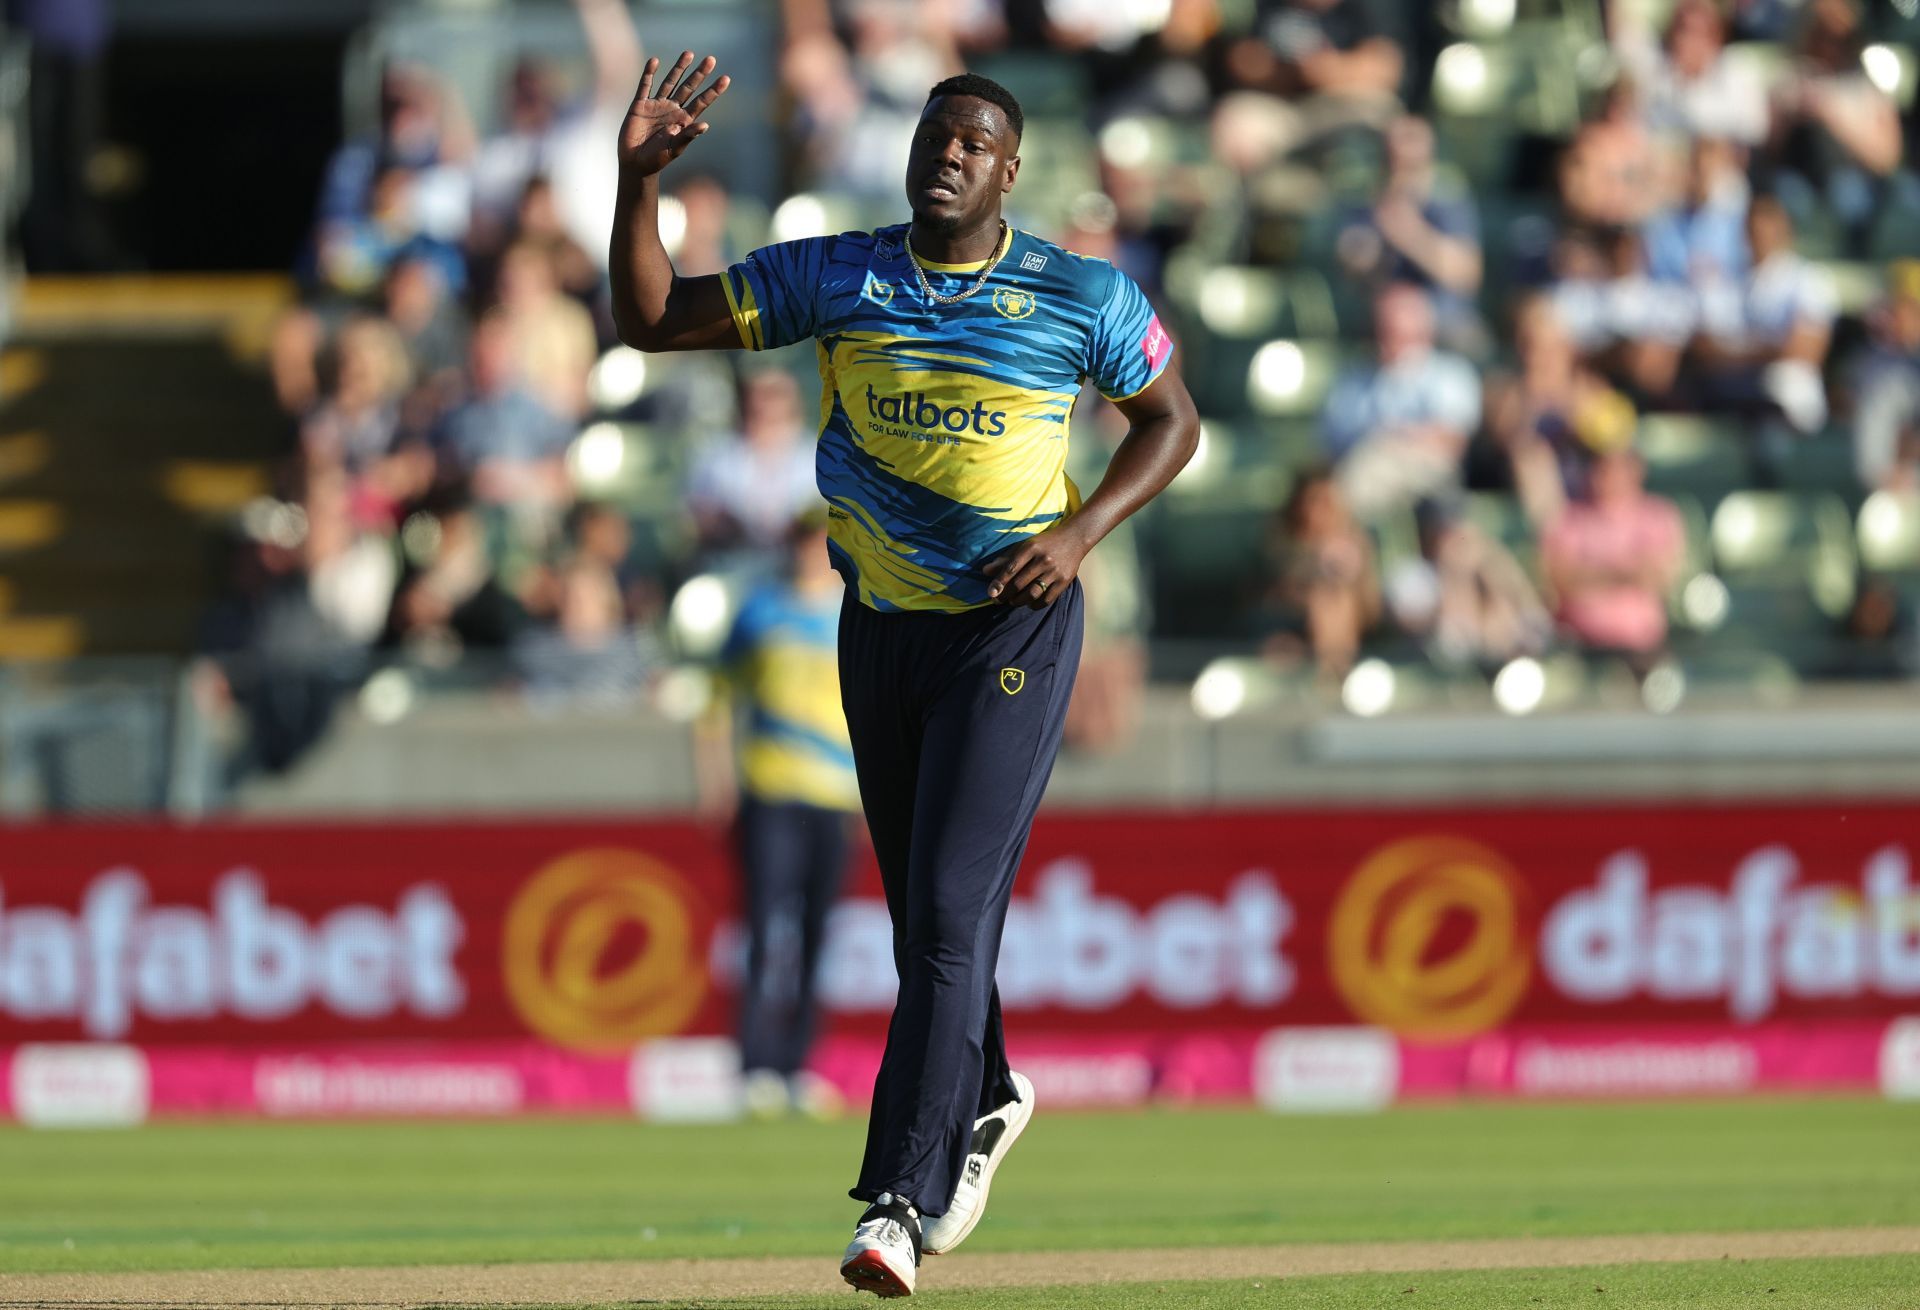 Carlos Brathwaite is the current leading wicket taker in the competition